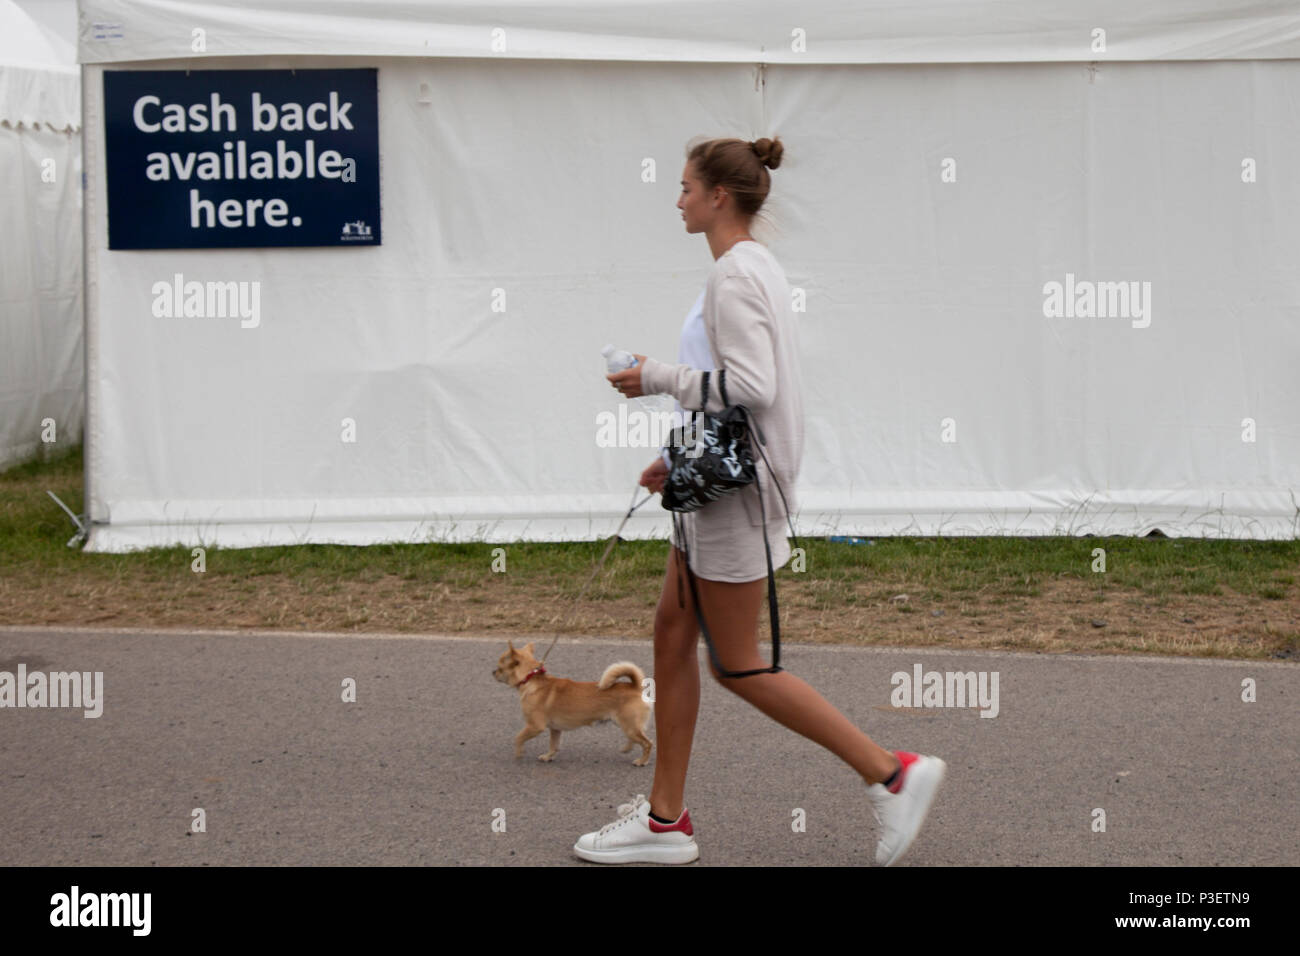 Cash back available here sign at the Equerry Bolesworth International Horse Show Stock Photo